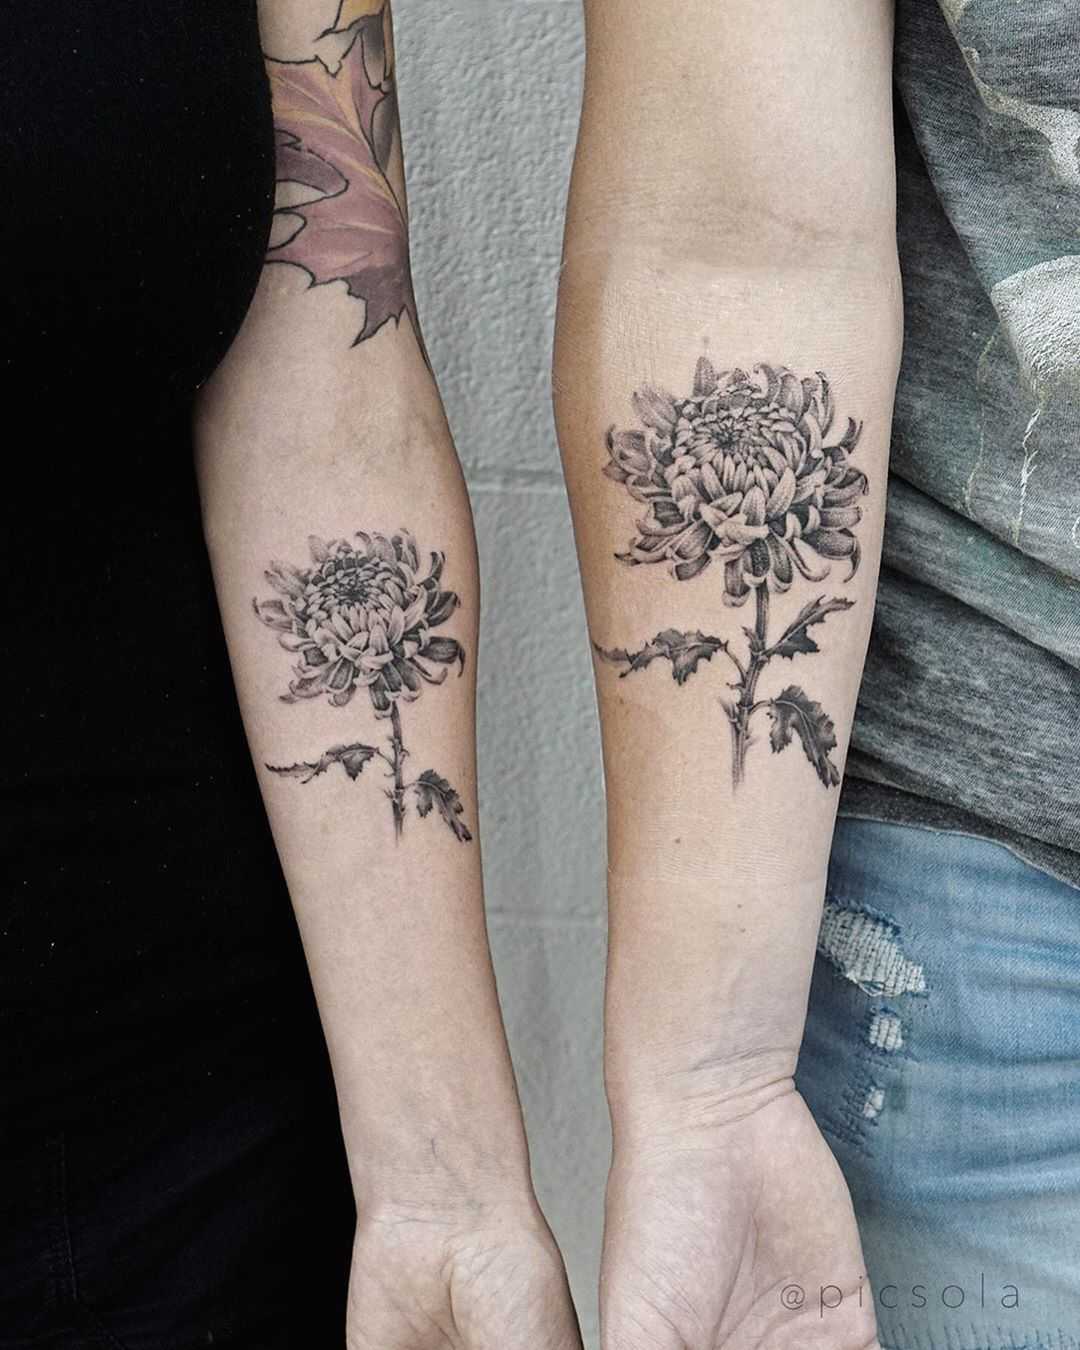 Mom and son matching flower tattoos by tattooist picsola